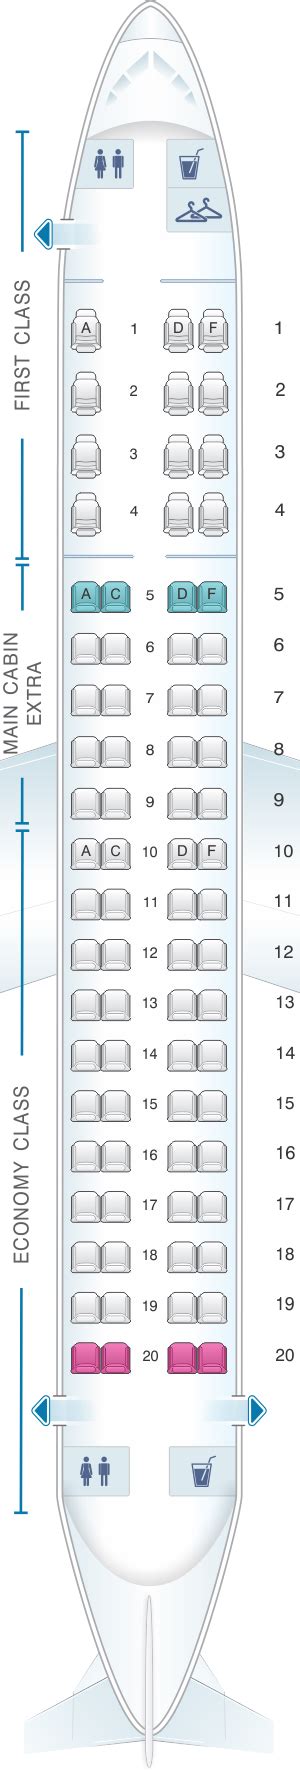 Embraer 175 american airlines seat map. SkyWest Airlines Embraer E175 Seat Map. SkyWest Airlines operates only one model of Embraer, E175. As of 2022, the company has 199 E175 planes. The airline chose the airliner because of its power, reliability, and low noise level. Embraer E 175 is a medium-range narrow-bodied aircraft, a 1.78m-longer modification of the E170. 